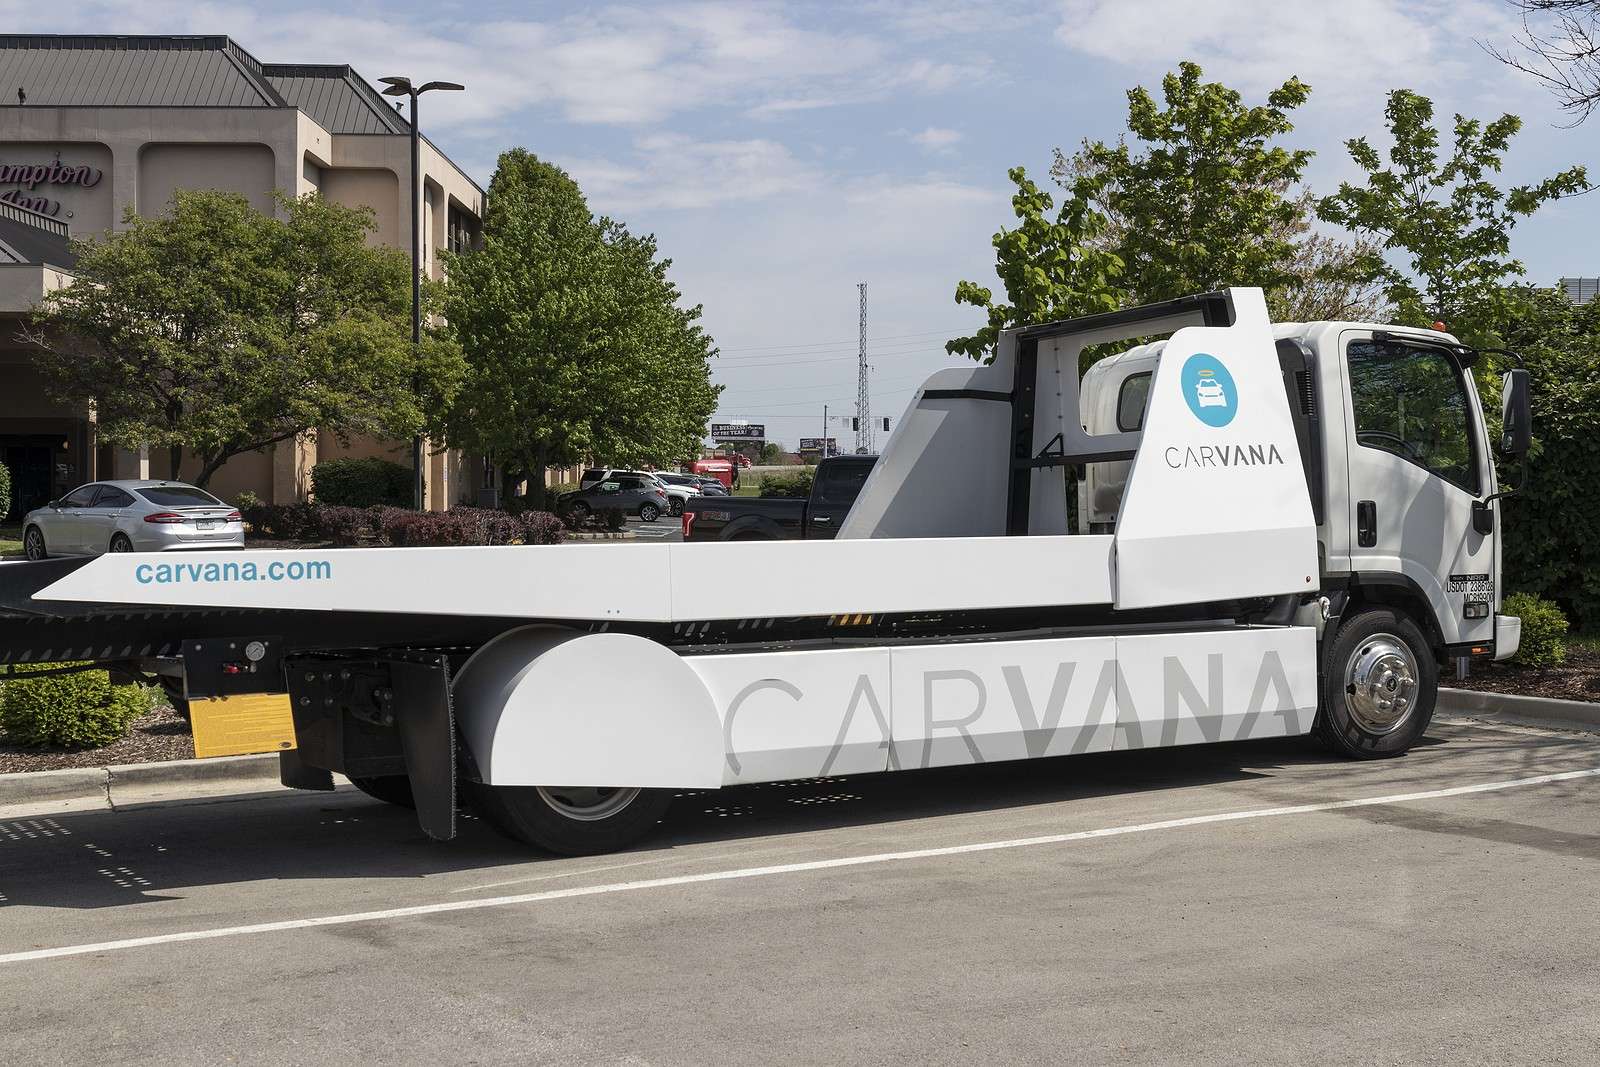 is carvana the best place to sell your damaged vehicle